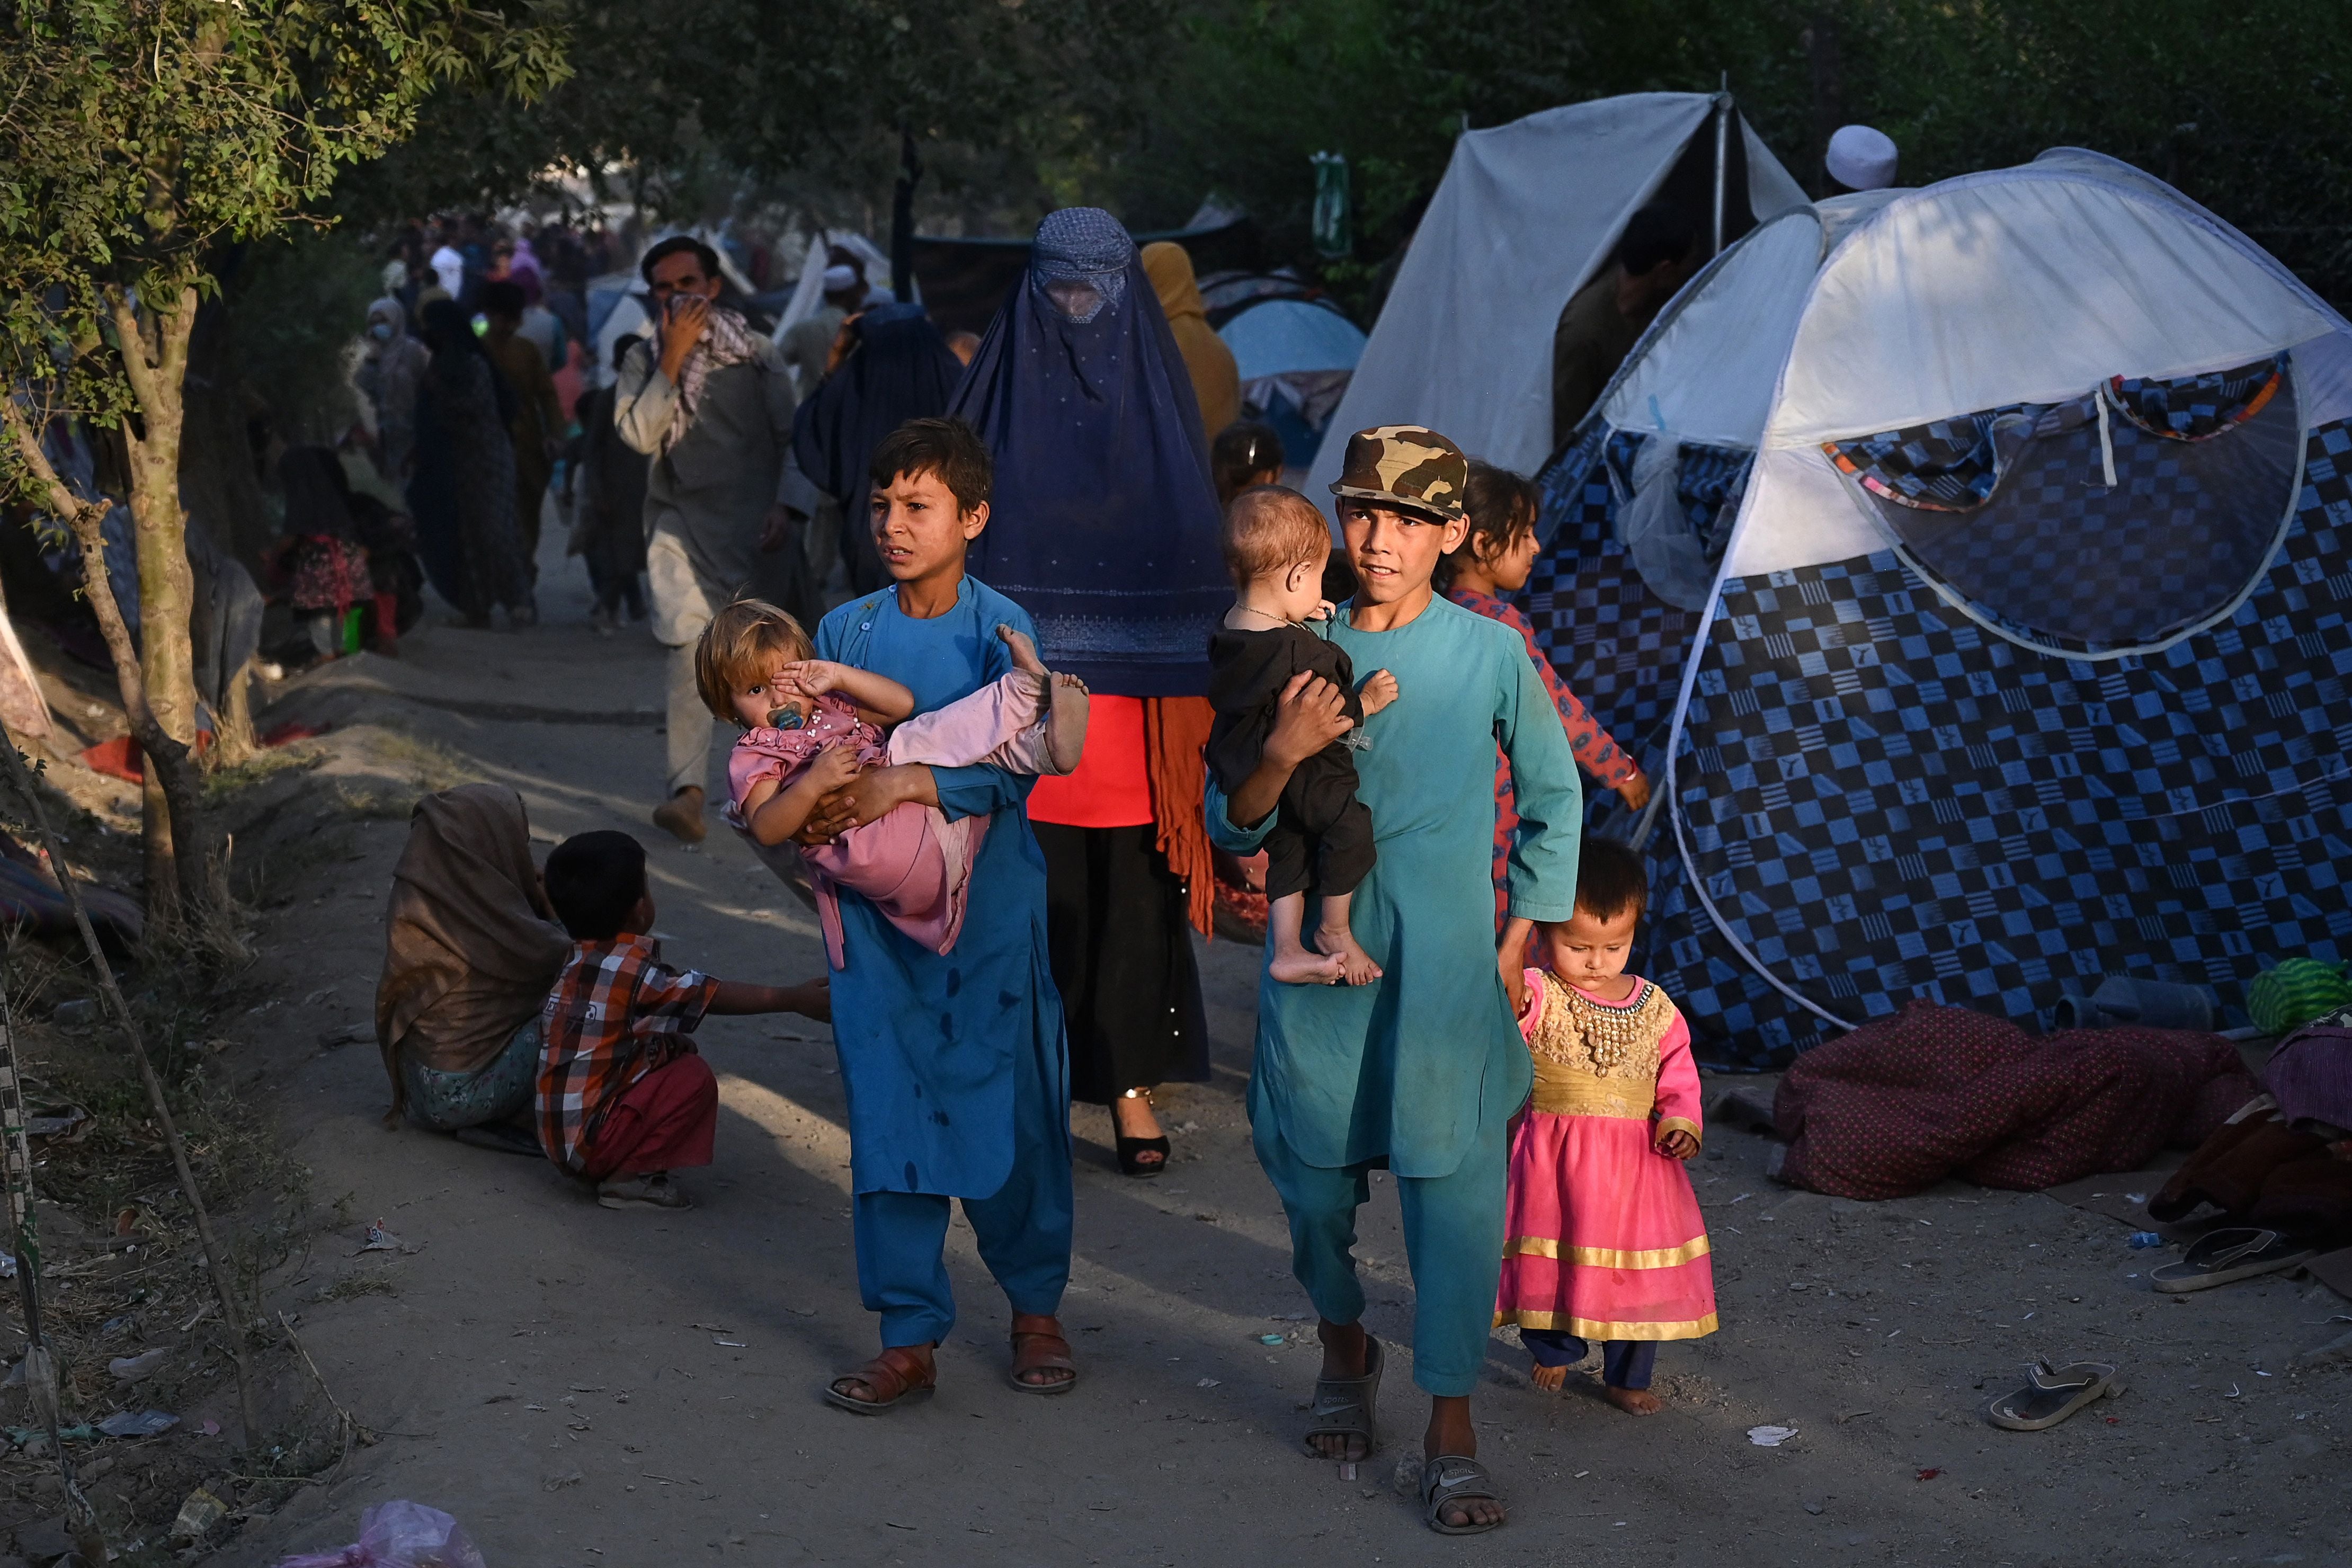 Internally displaced Afghan families, who fled from Kunduz, Takhar and Baghlan province due to battles between Taliban and Afghan security forces, walk past their temporary tents at Sara-e-Shamali in Kabul on 11 August, 2021. - A former US ambassador to Afghanistan has said that Joe Biden is abandoning the country in its hour of need.